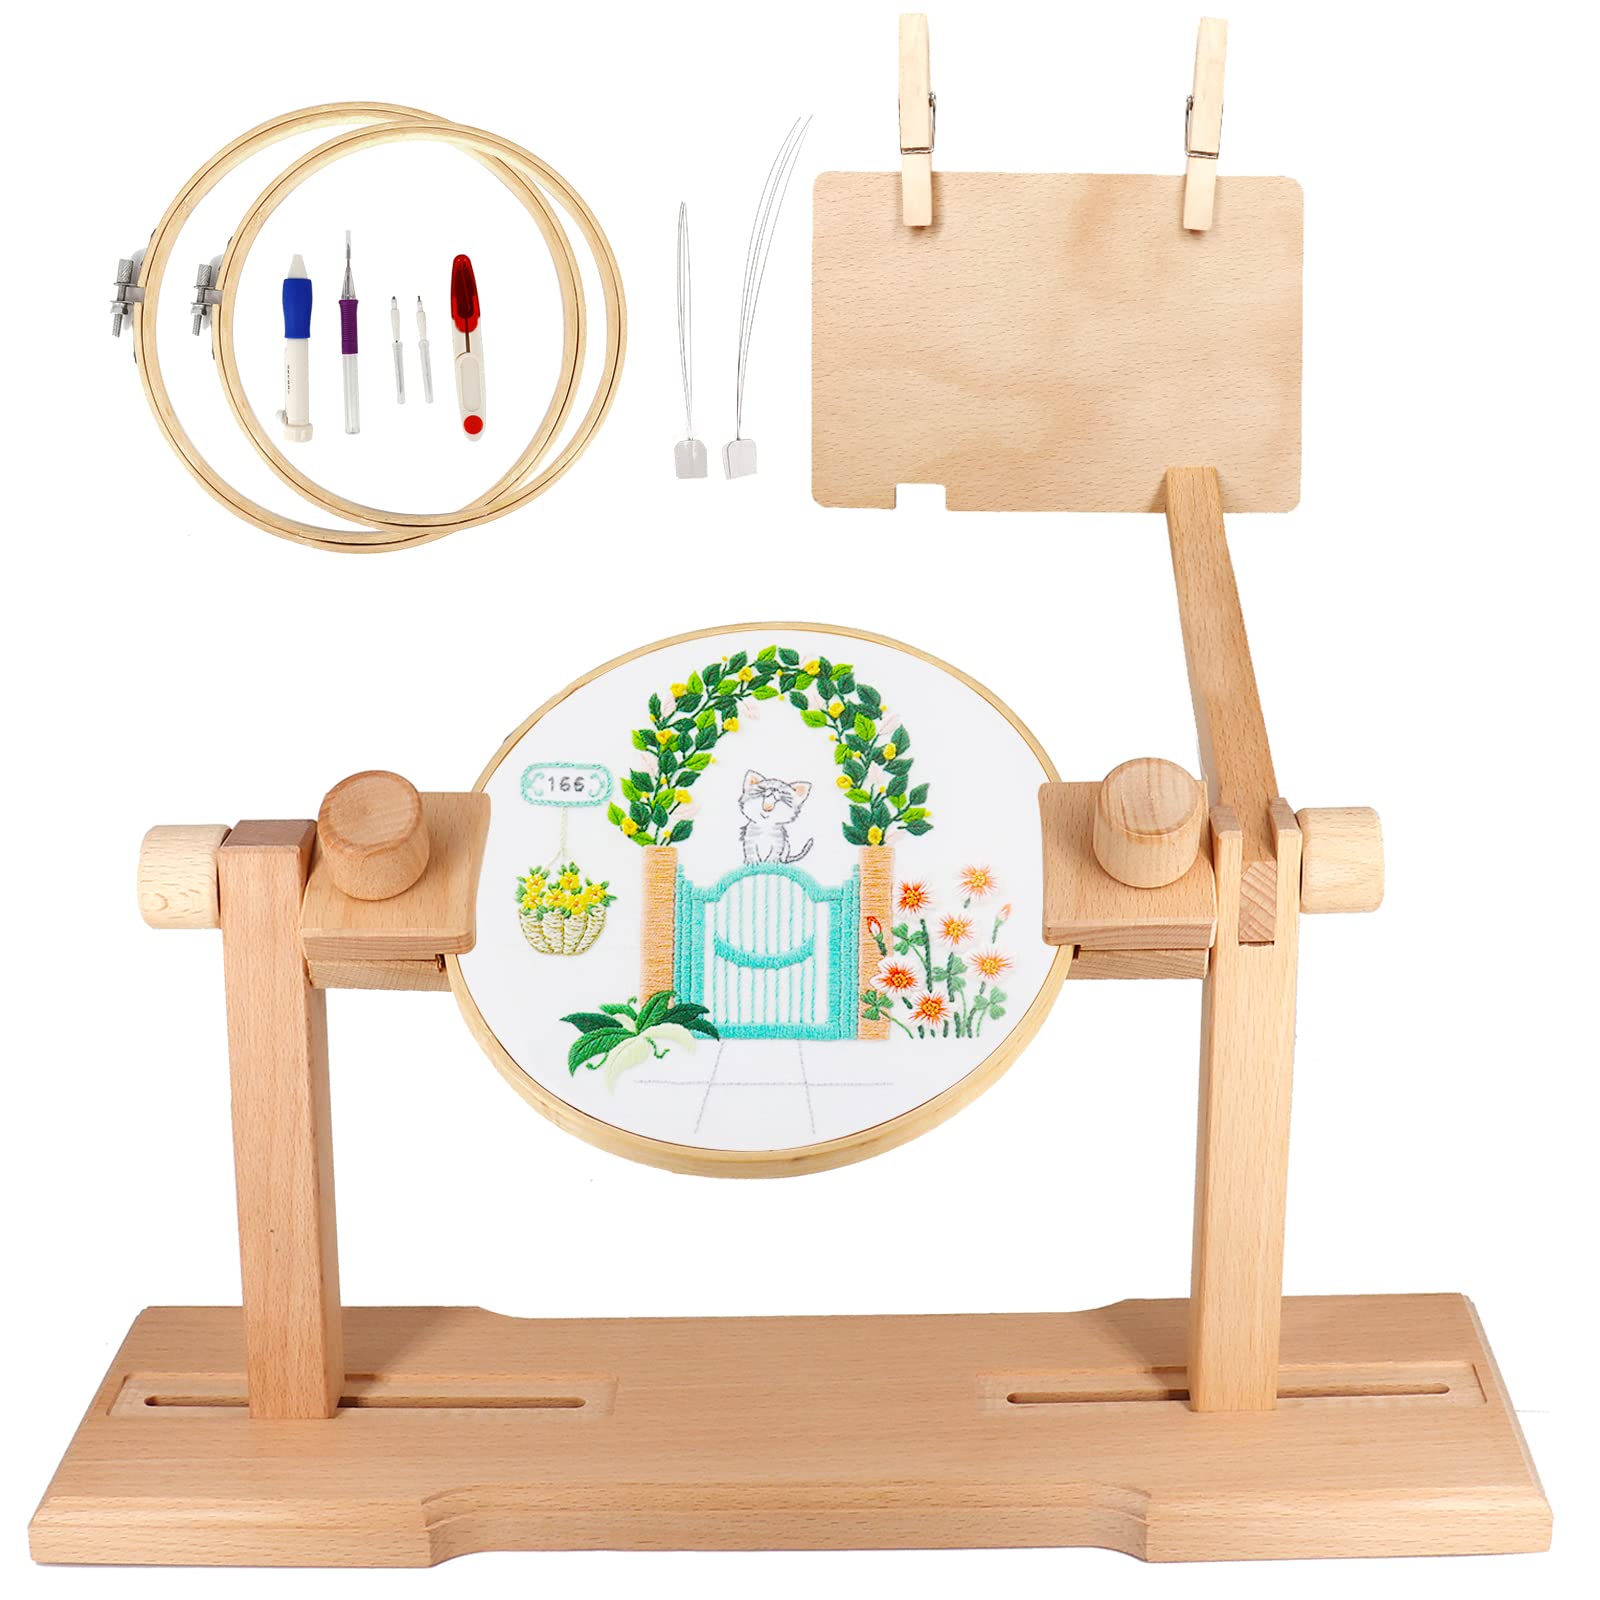 SolidGnik 14INCHES 15NOTES Solidgnik Embroidery Stand,Adjustable Embroidery  Hoop Holder With Embroidery Kit And 3Pcs Embroidery Hoops